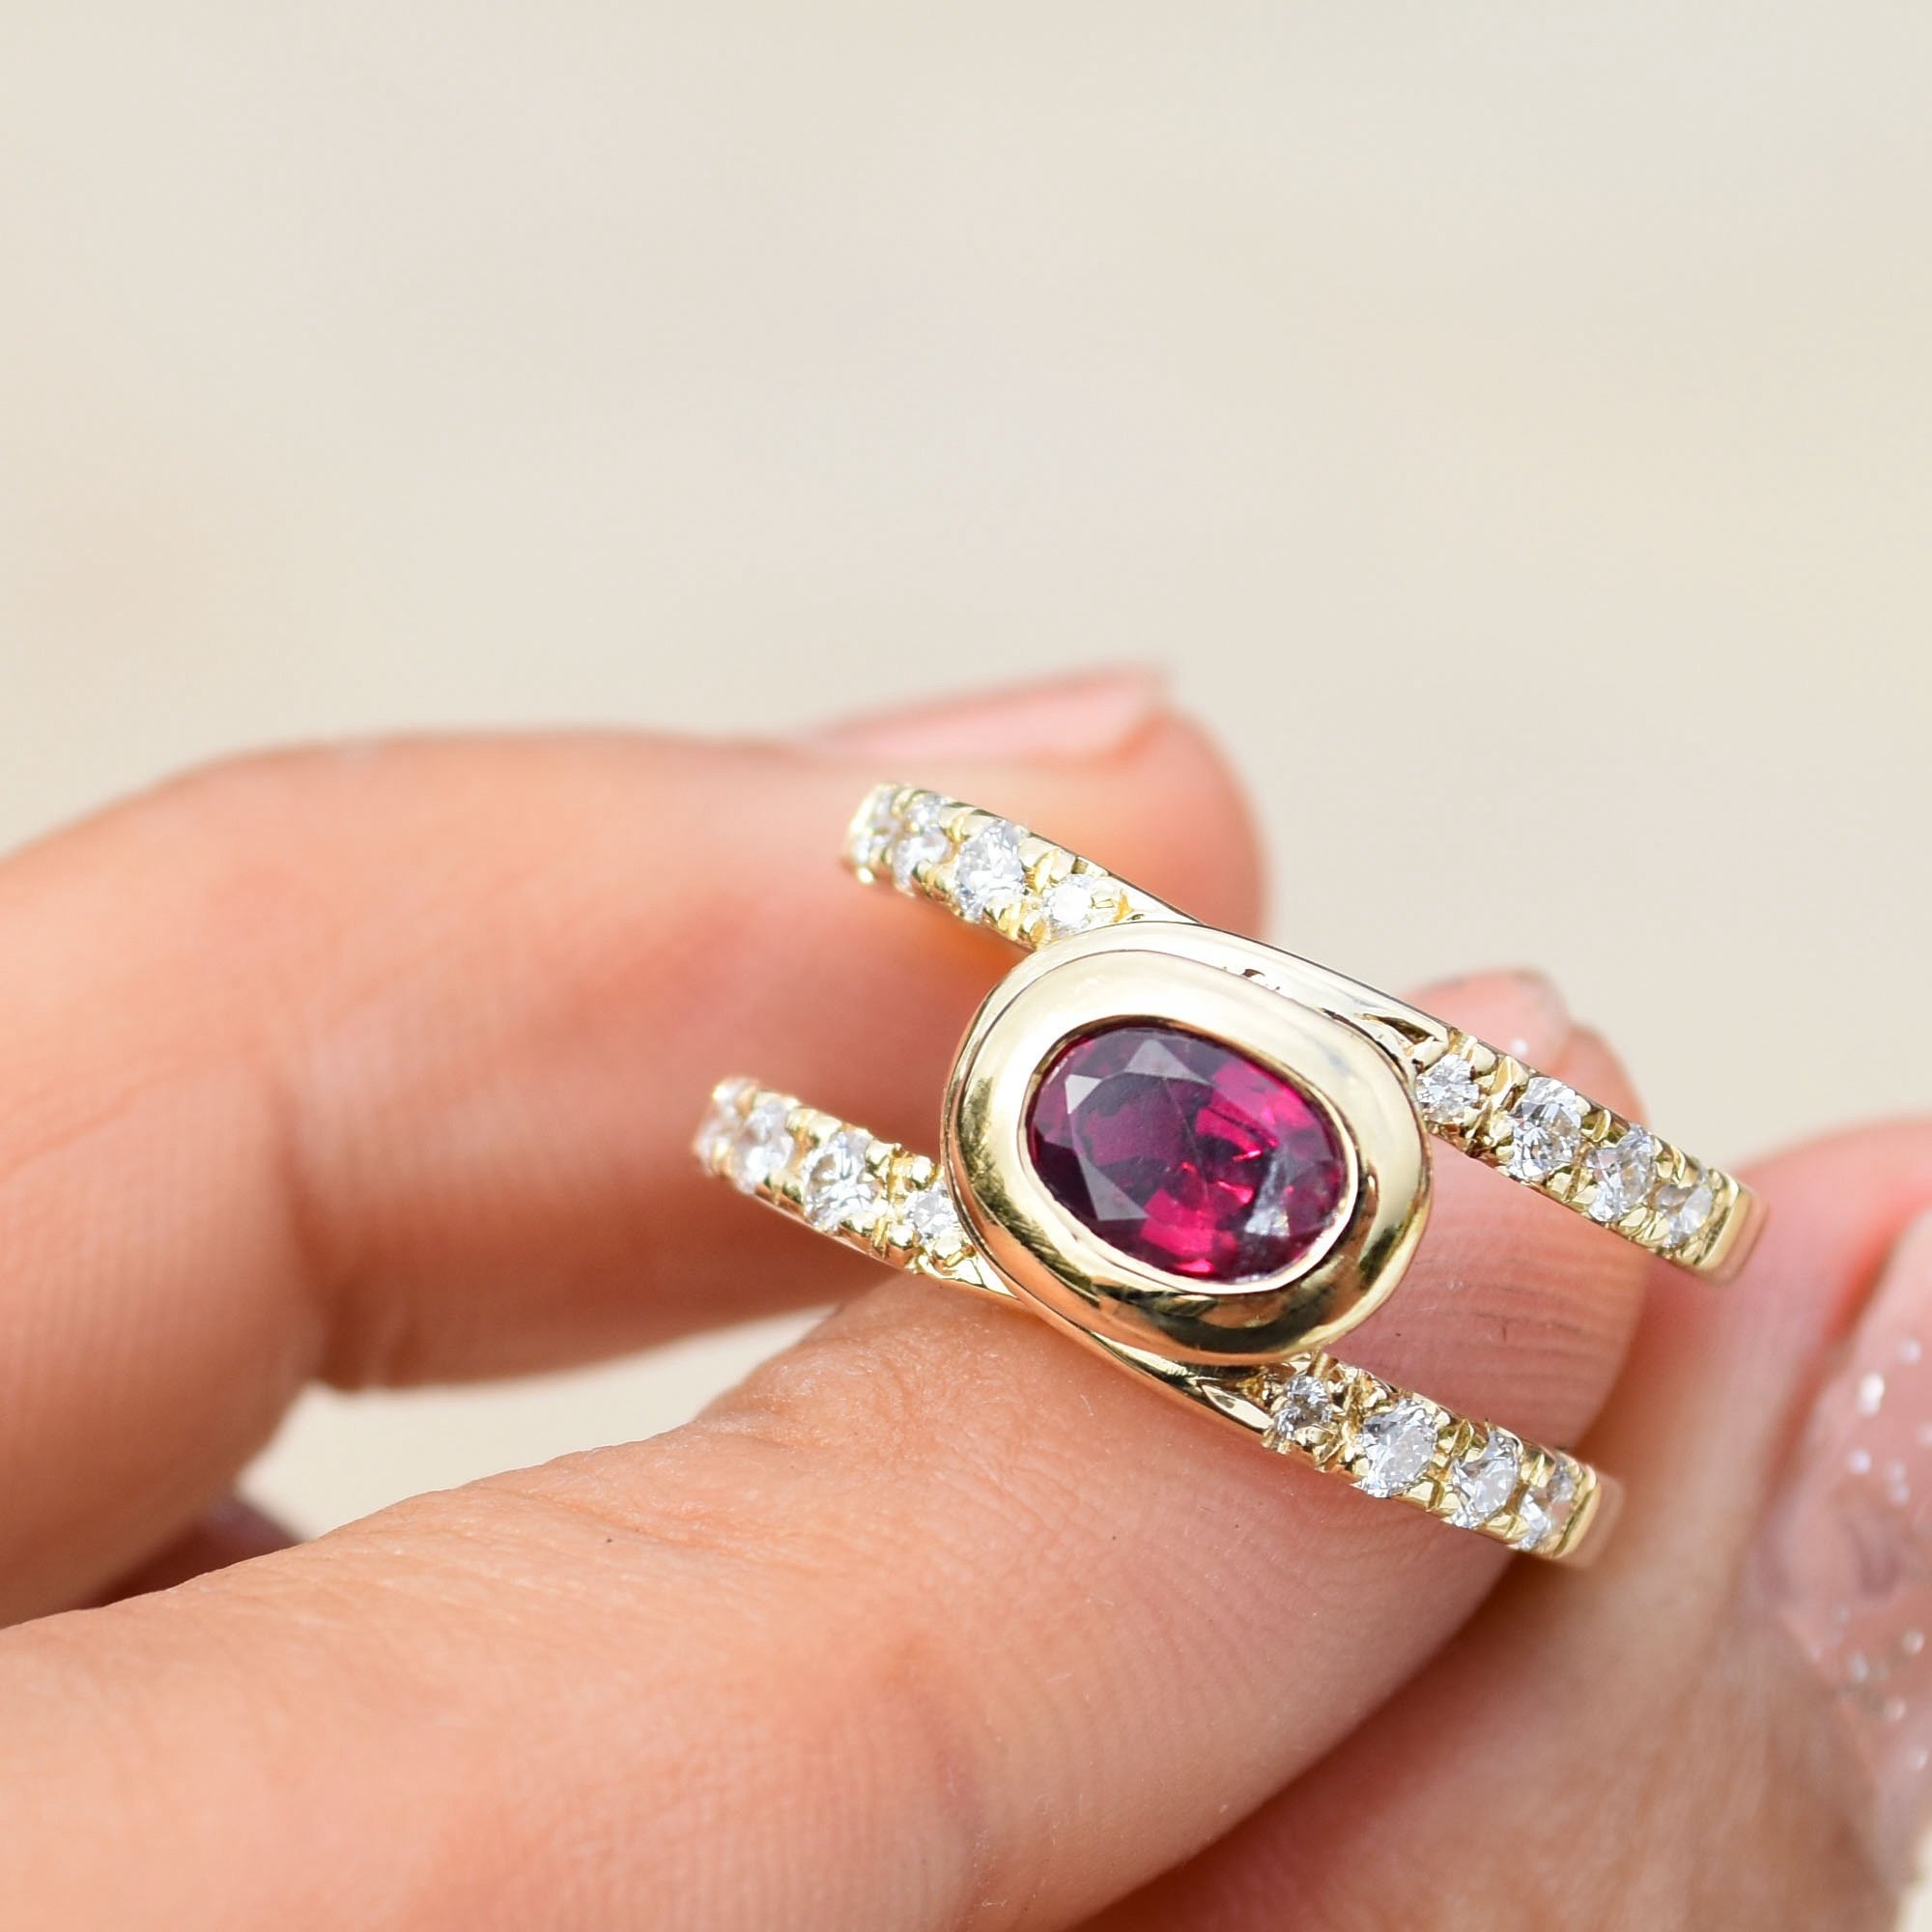 Details of the Clip Ring featuring a gorgeous Ruby set on a wide bezel and With cut claw pav&eacute; set on shoulders 💕 

Design love, design thinking to create unique and different pieces that express your style and personality❣️

Ruby is July&rsqu